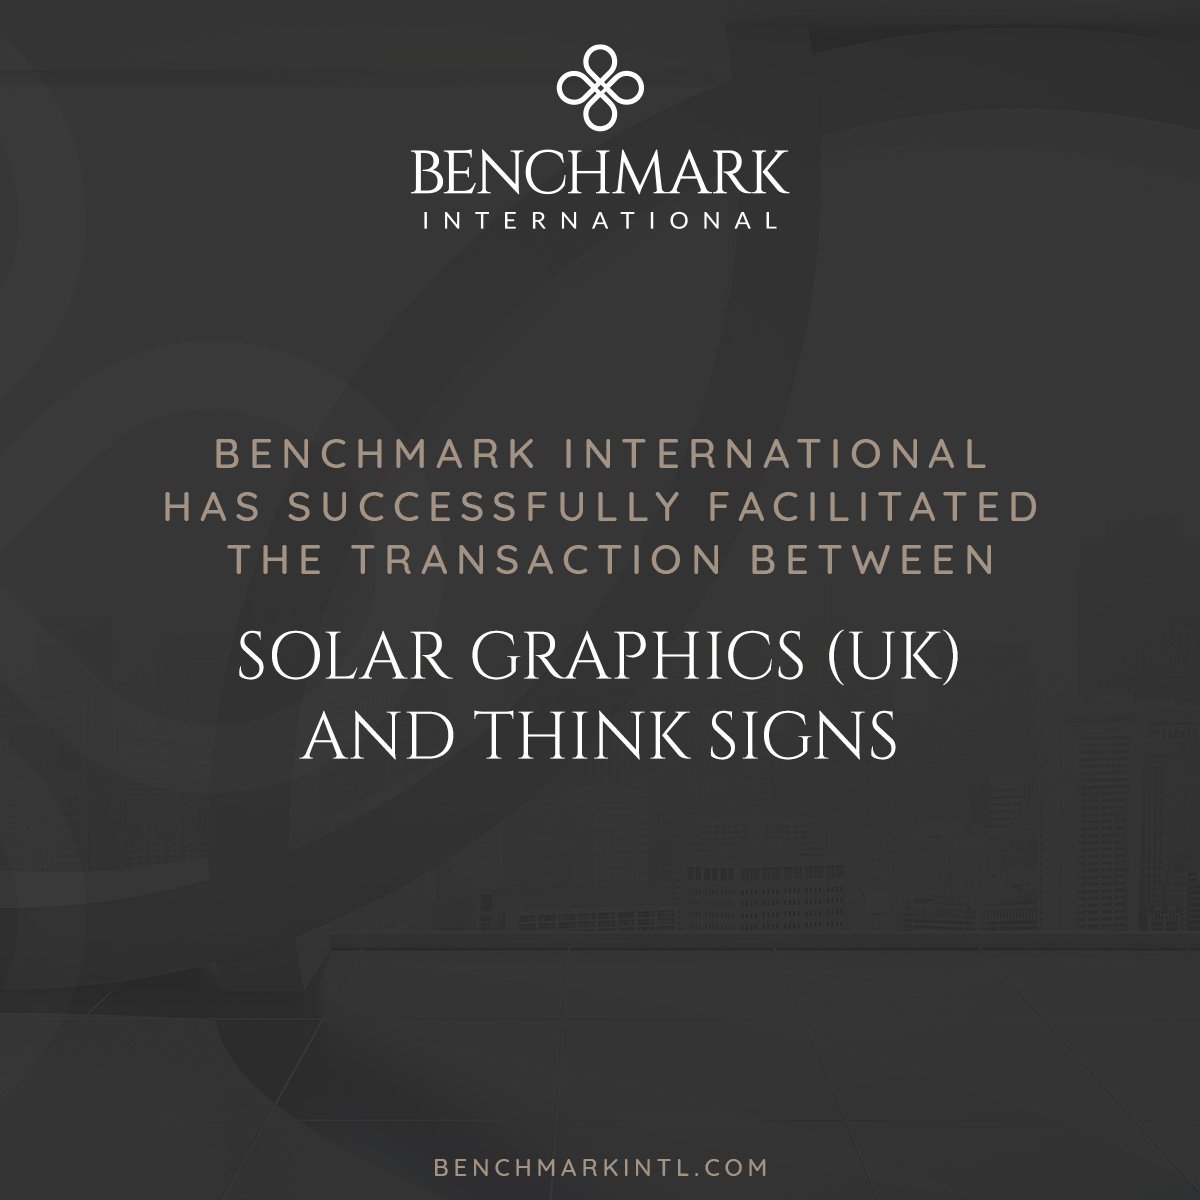 Solar Graphics acquired by Think Signs 